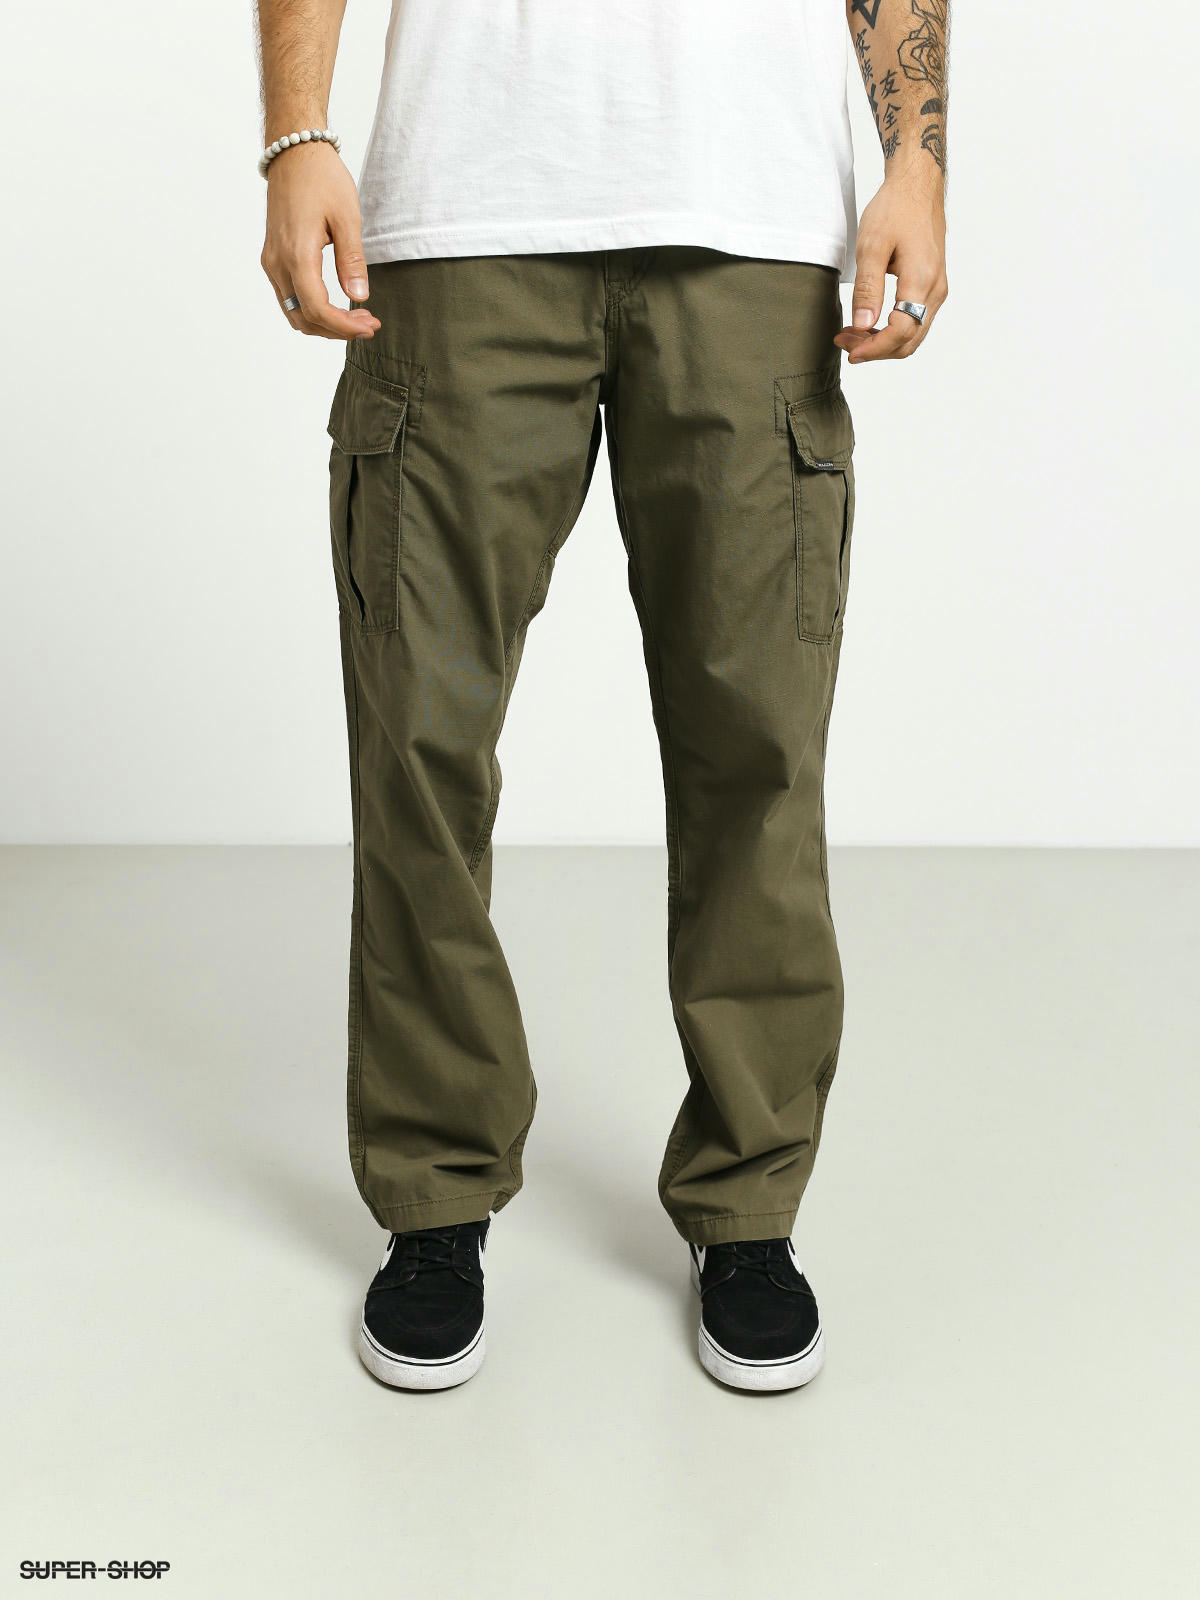 orSlow | US ARMY 2 POCKET CARGO PANT IN ARMY GREEN – RELIQUARY